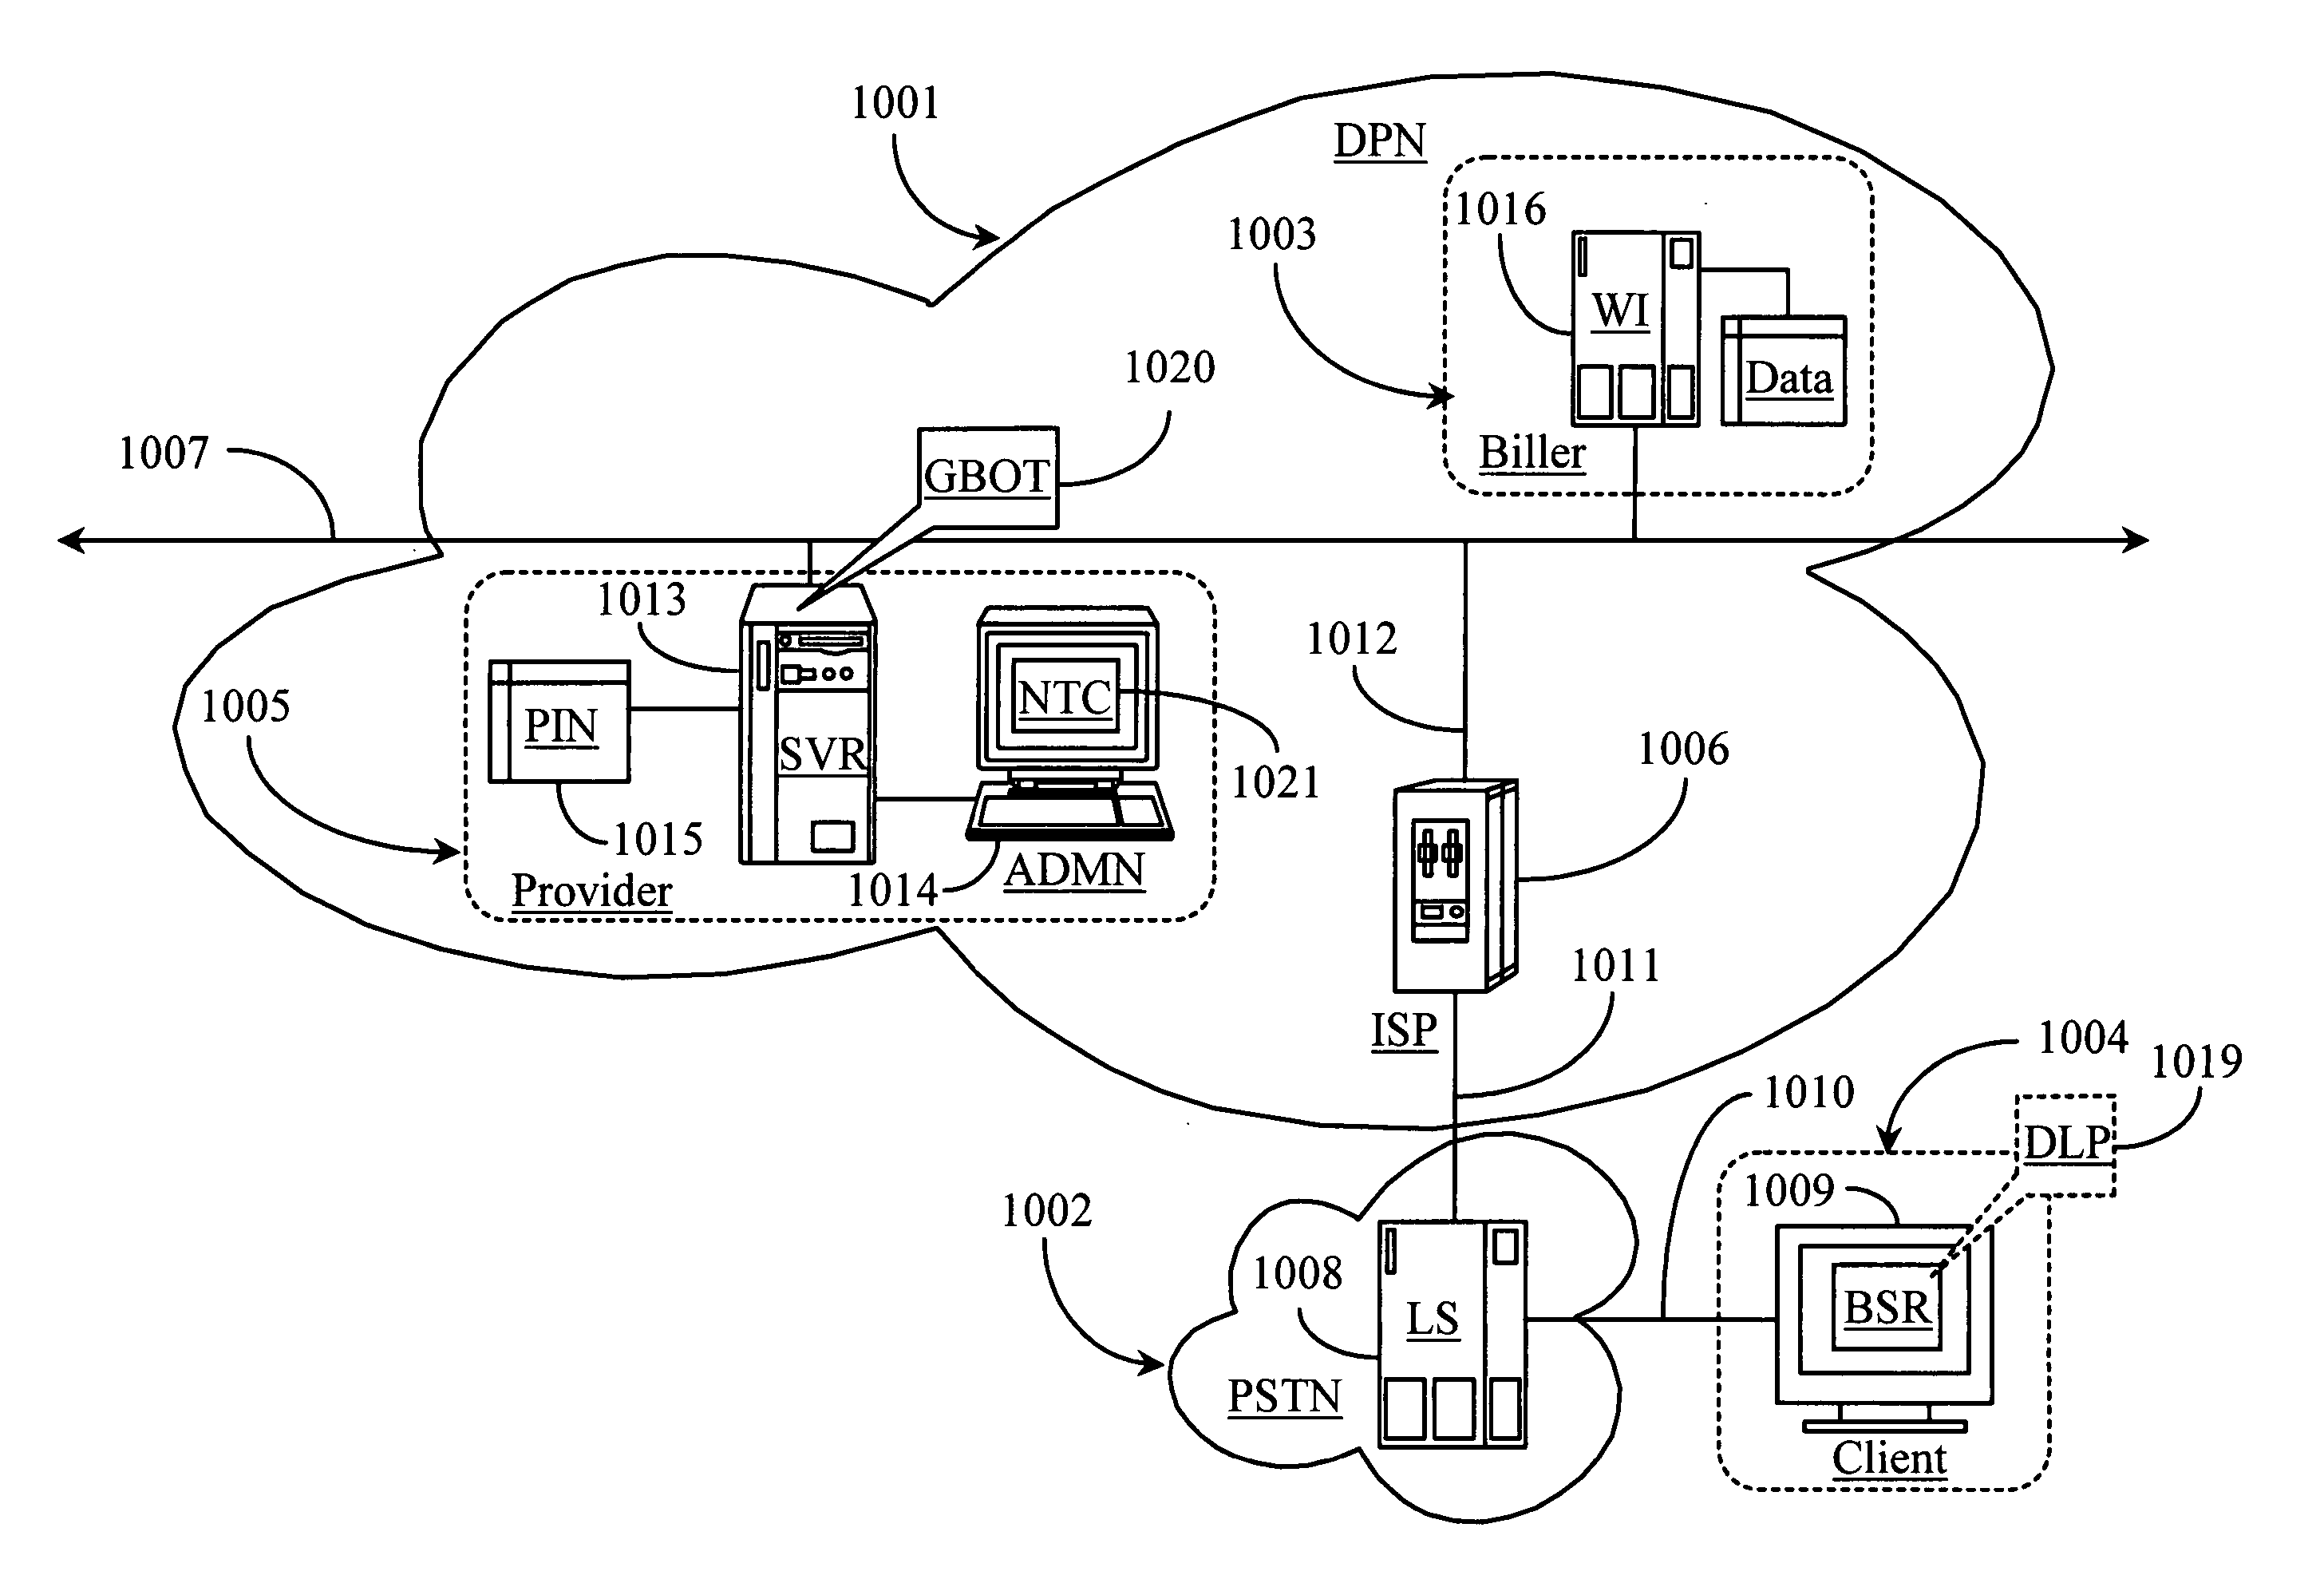 Method and apparatus for configuring and establishing a secure credential-based network link between a client and a service over a data-packet-network